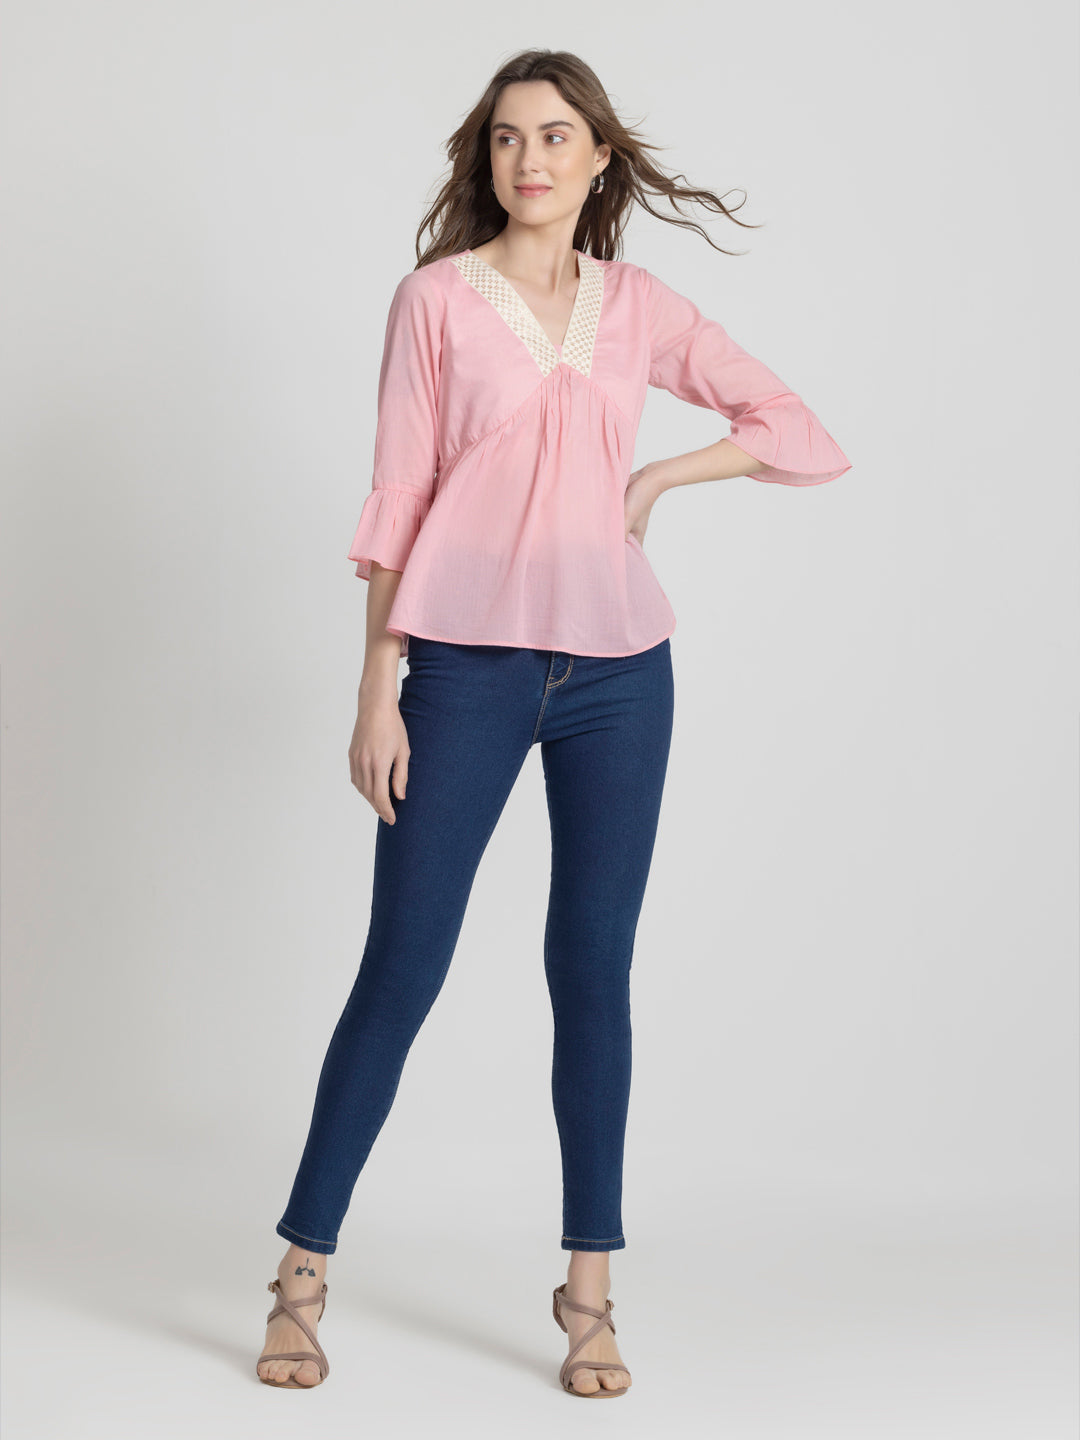 Gwen Top from Shaye India , Top for women